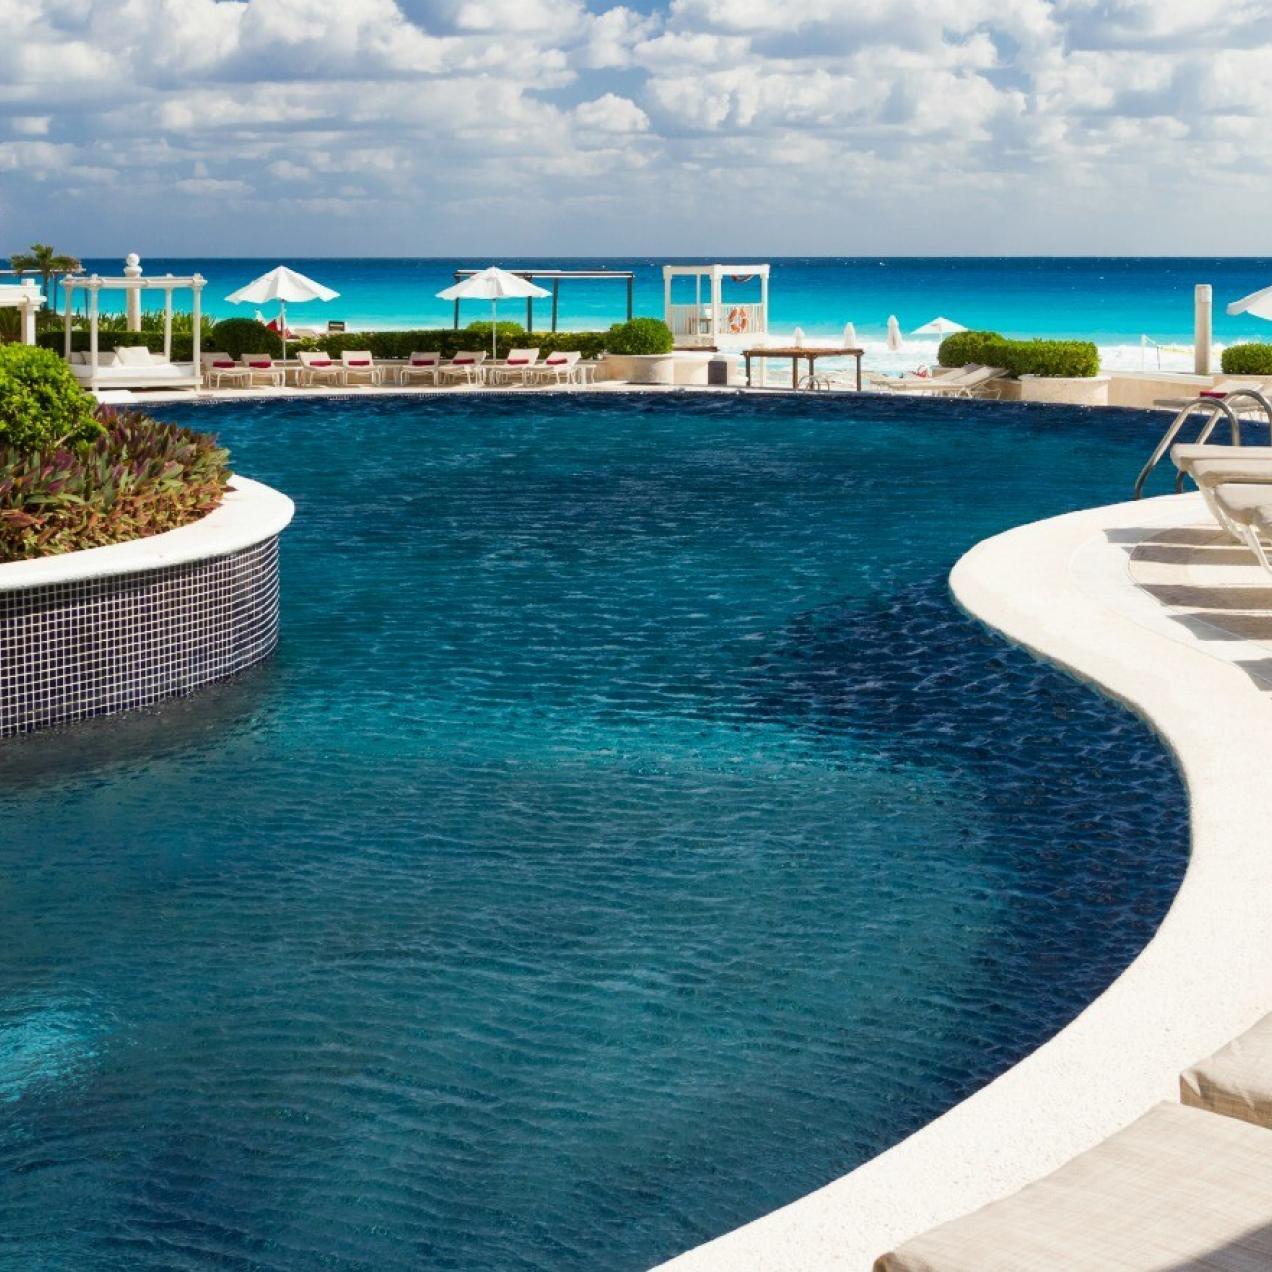 Nausicaa: A Cancun Therapy for the Senses